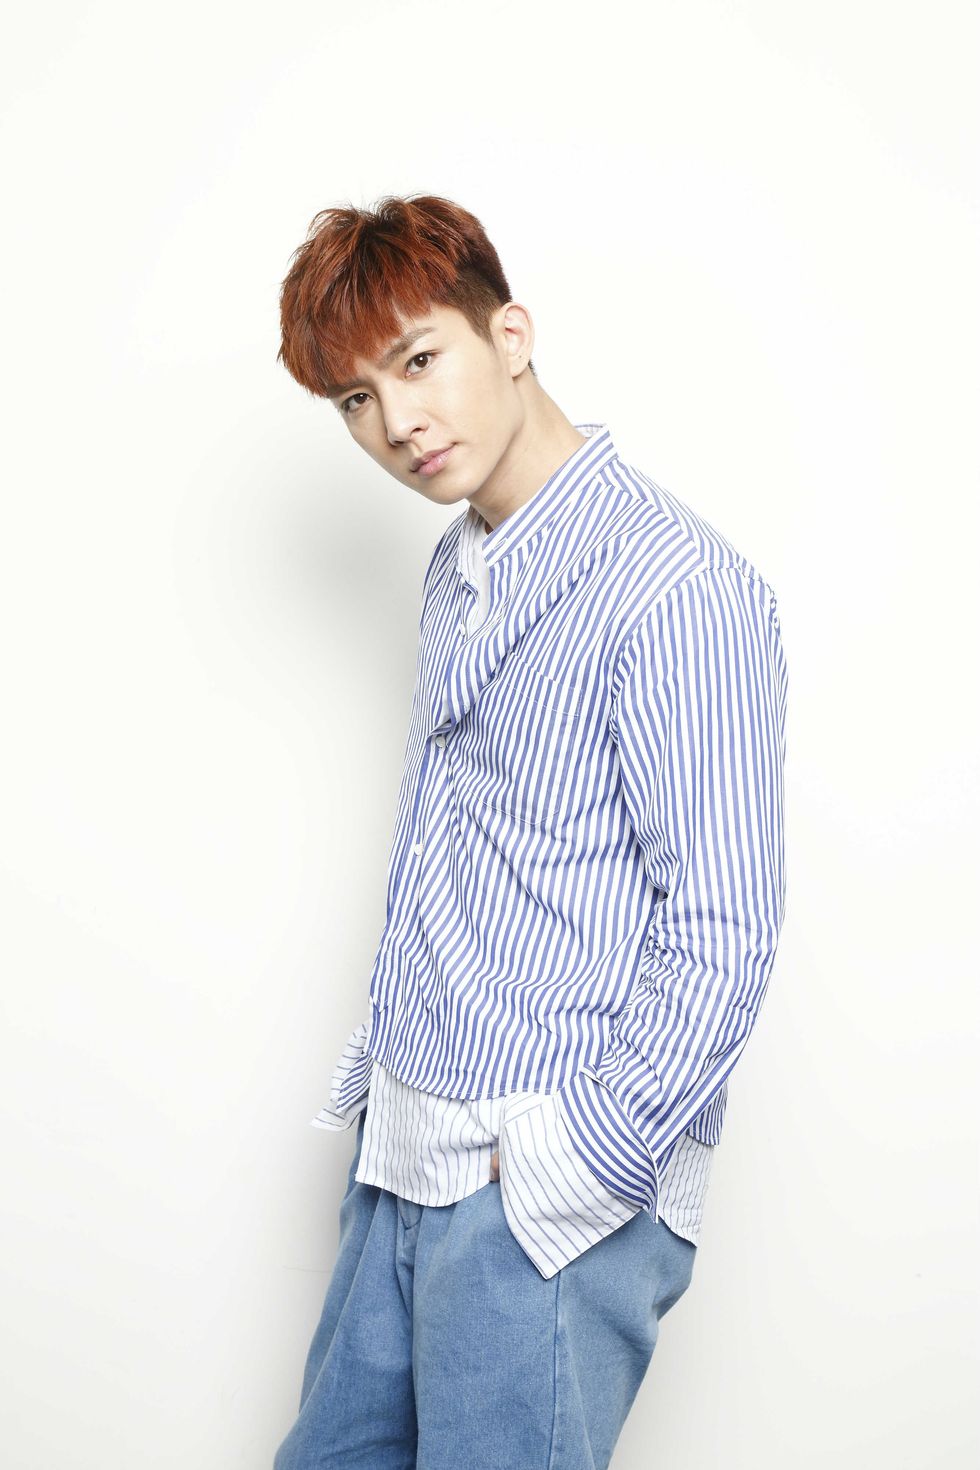 White, Clothing, Blue, Sleeve, Cool, Shoulder, Neck, Standing, Hairstyle, T-shirt, 